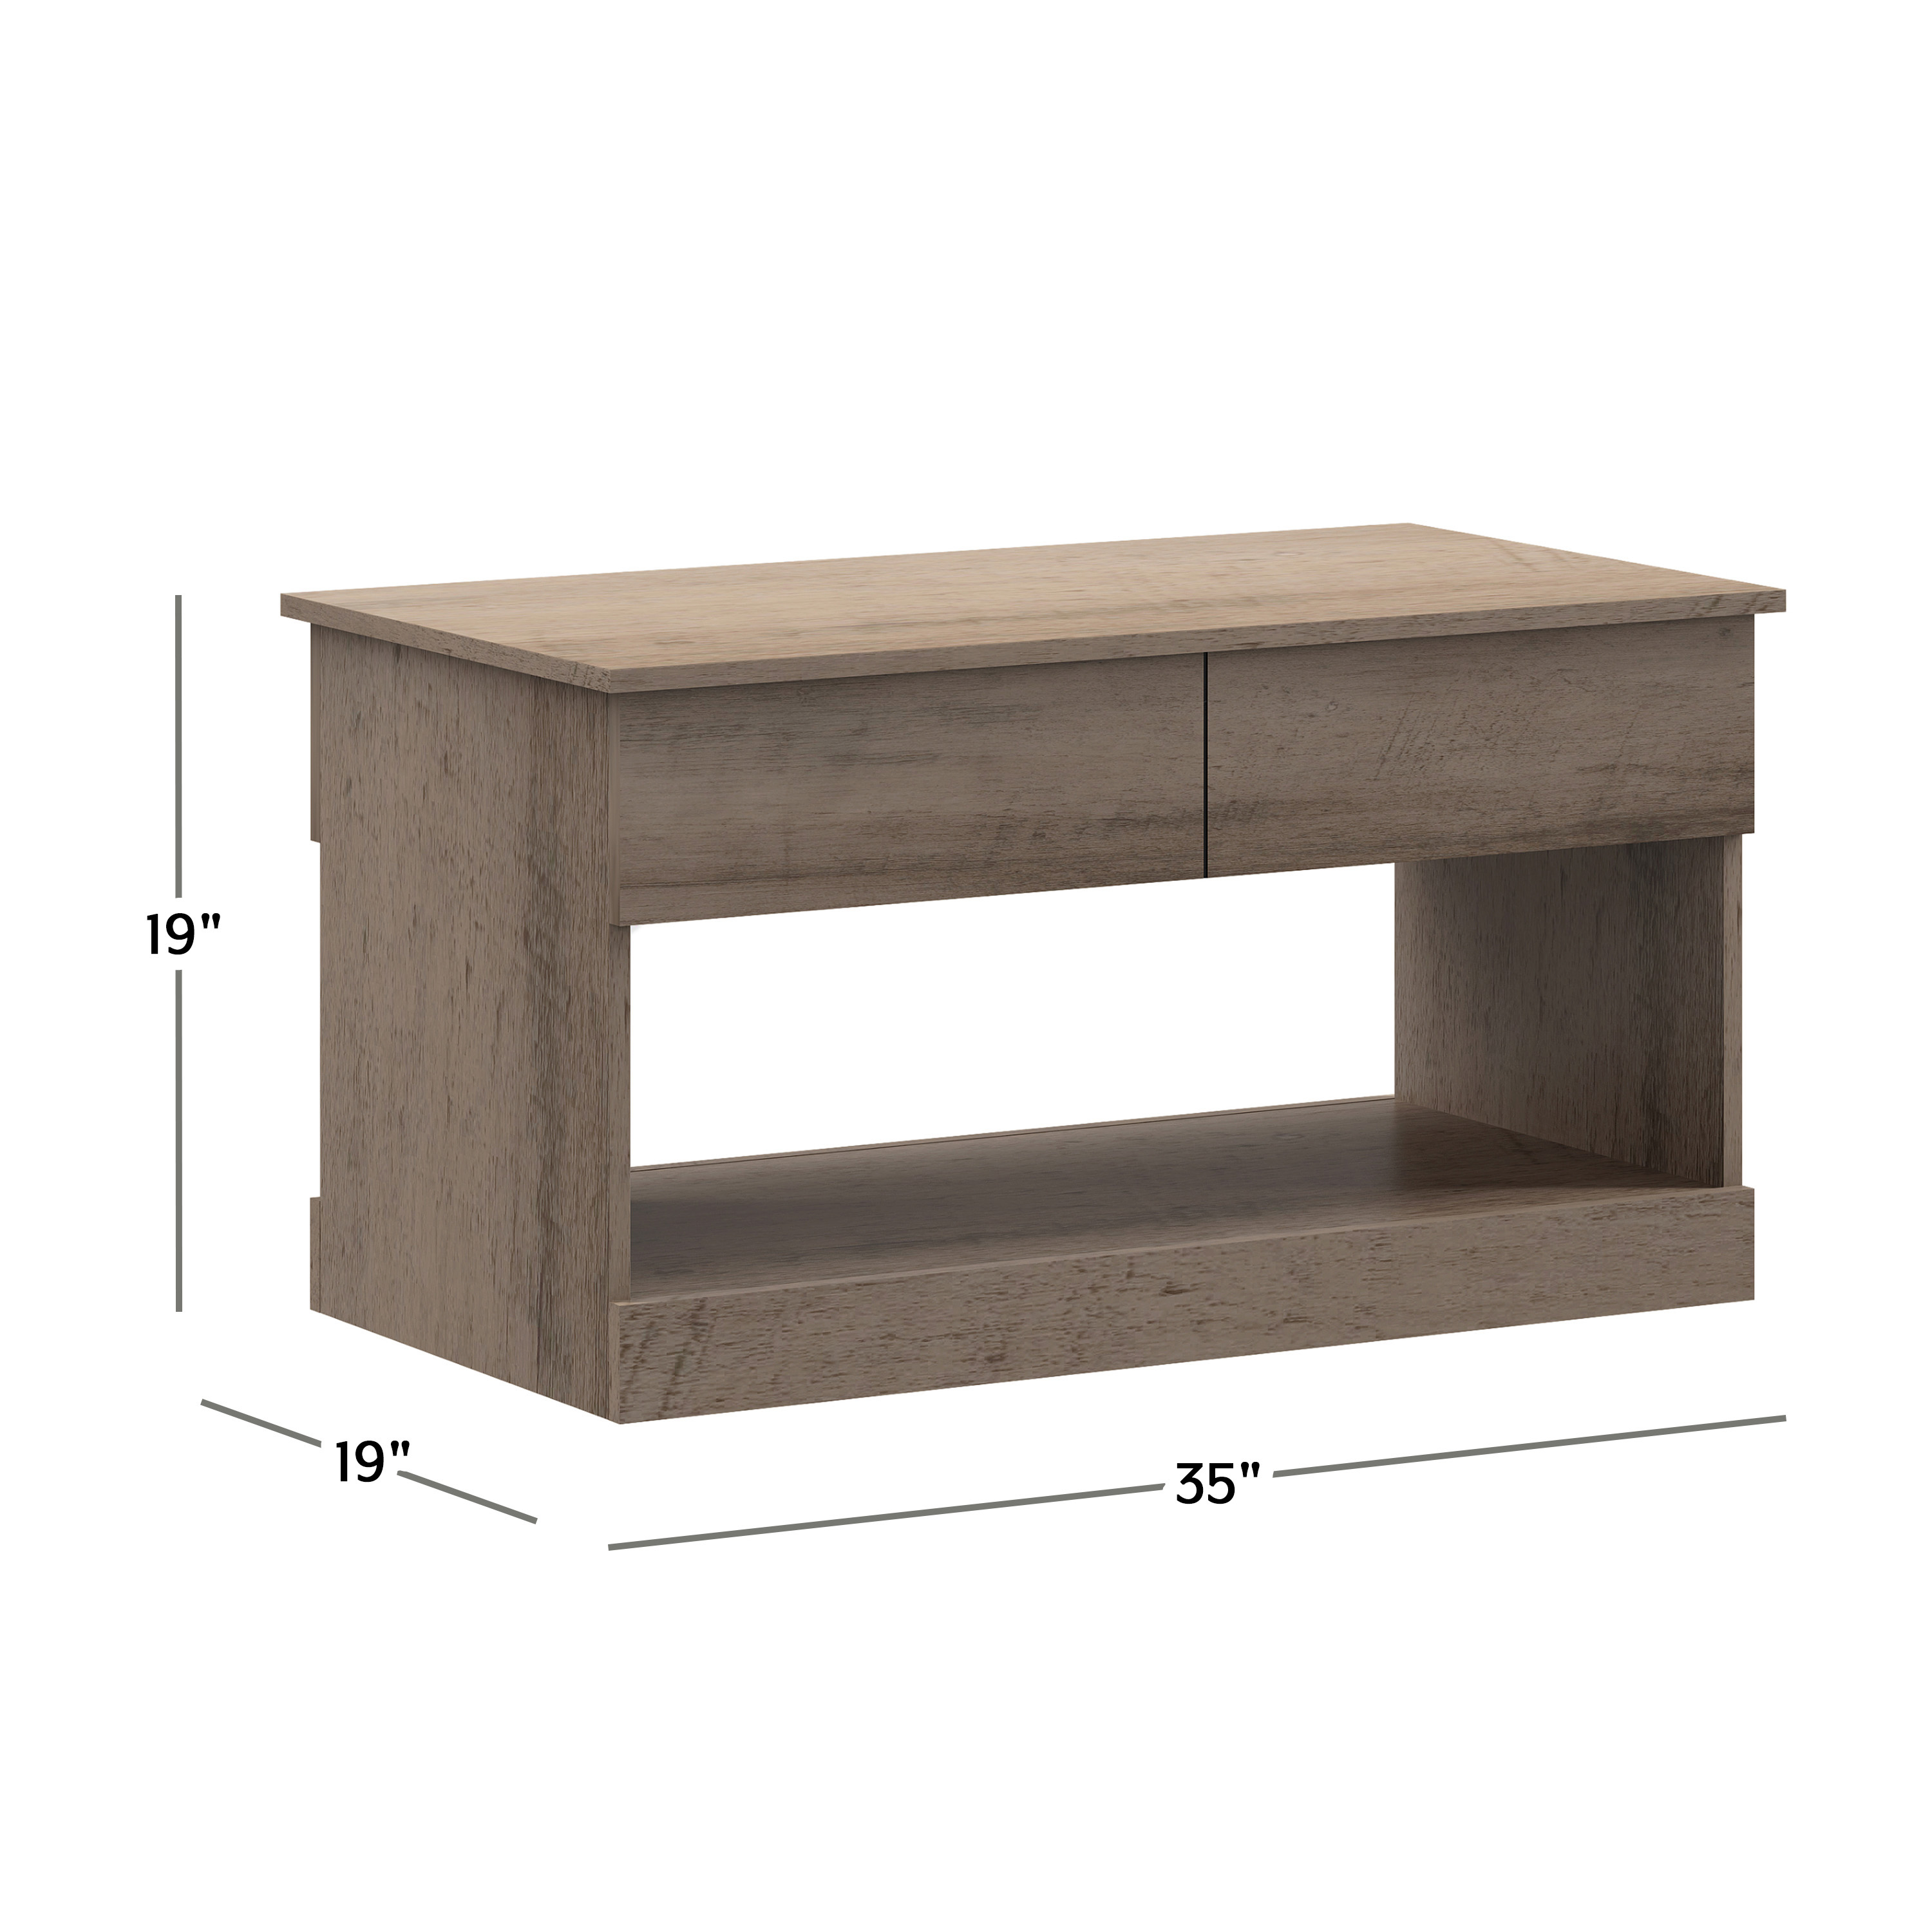 Brindle Rectangular Lift Top Coffee Table, Gray Oak, by Hillsdale Living Essentials - image 5 of 22